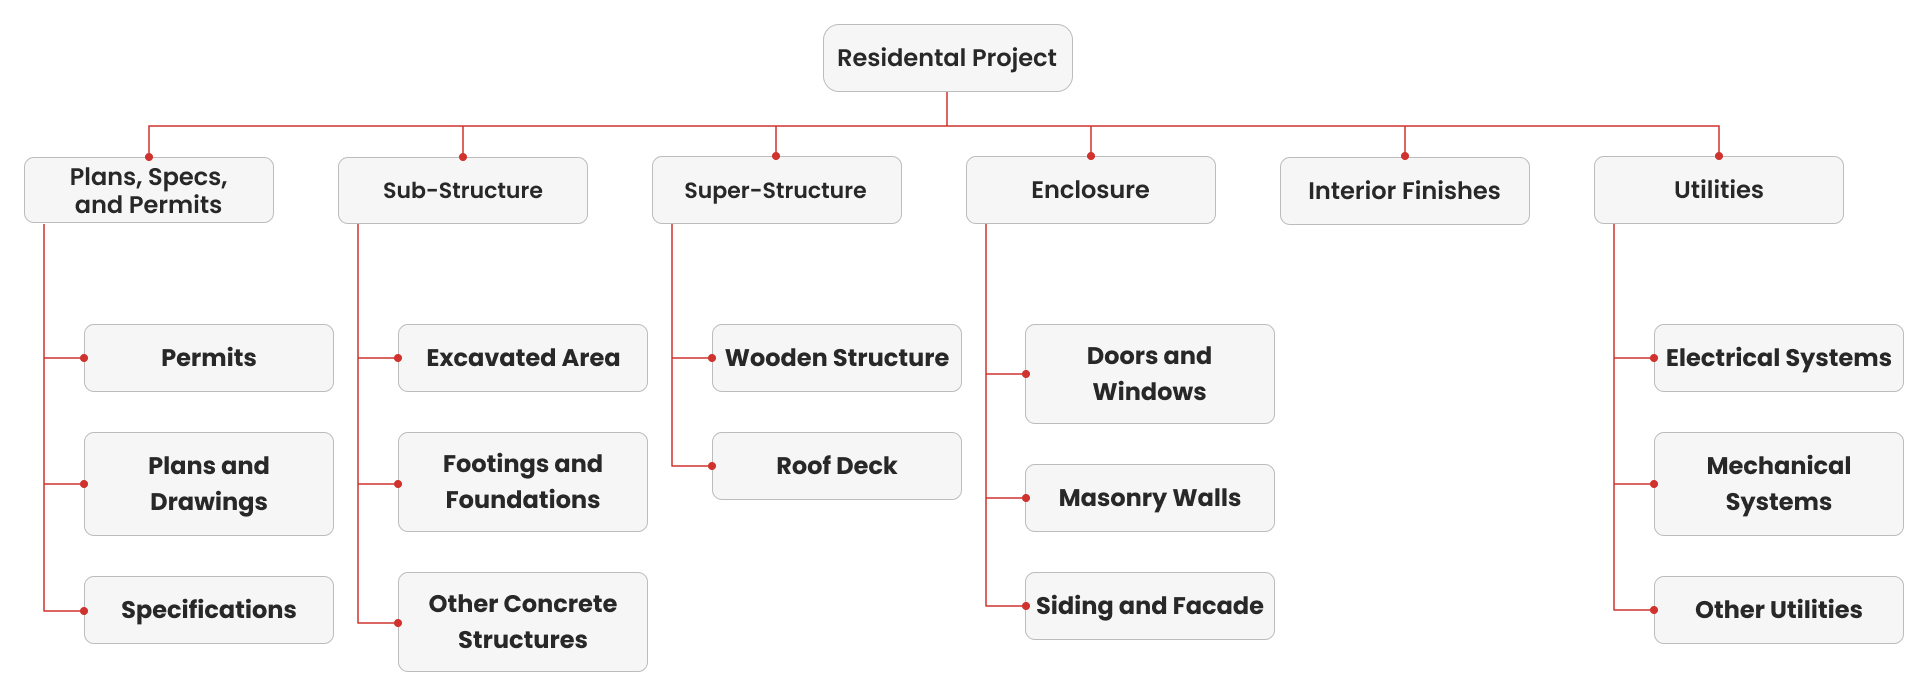 An example of a deliverable based work breakdown structure